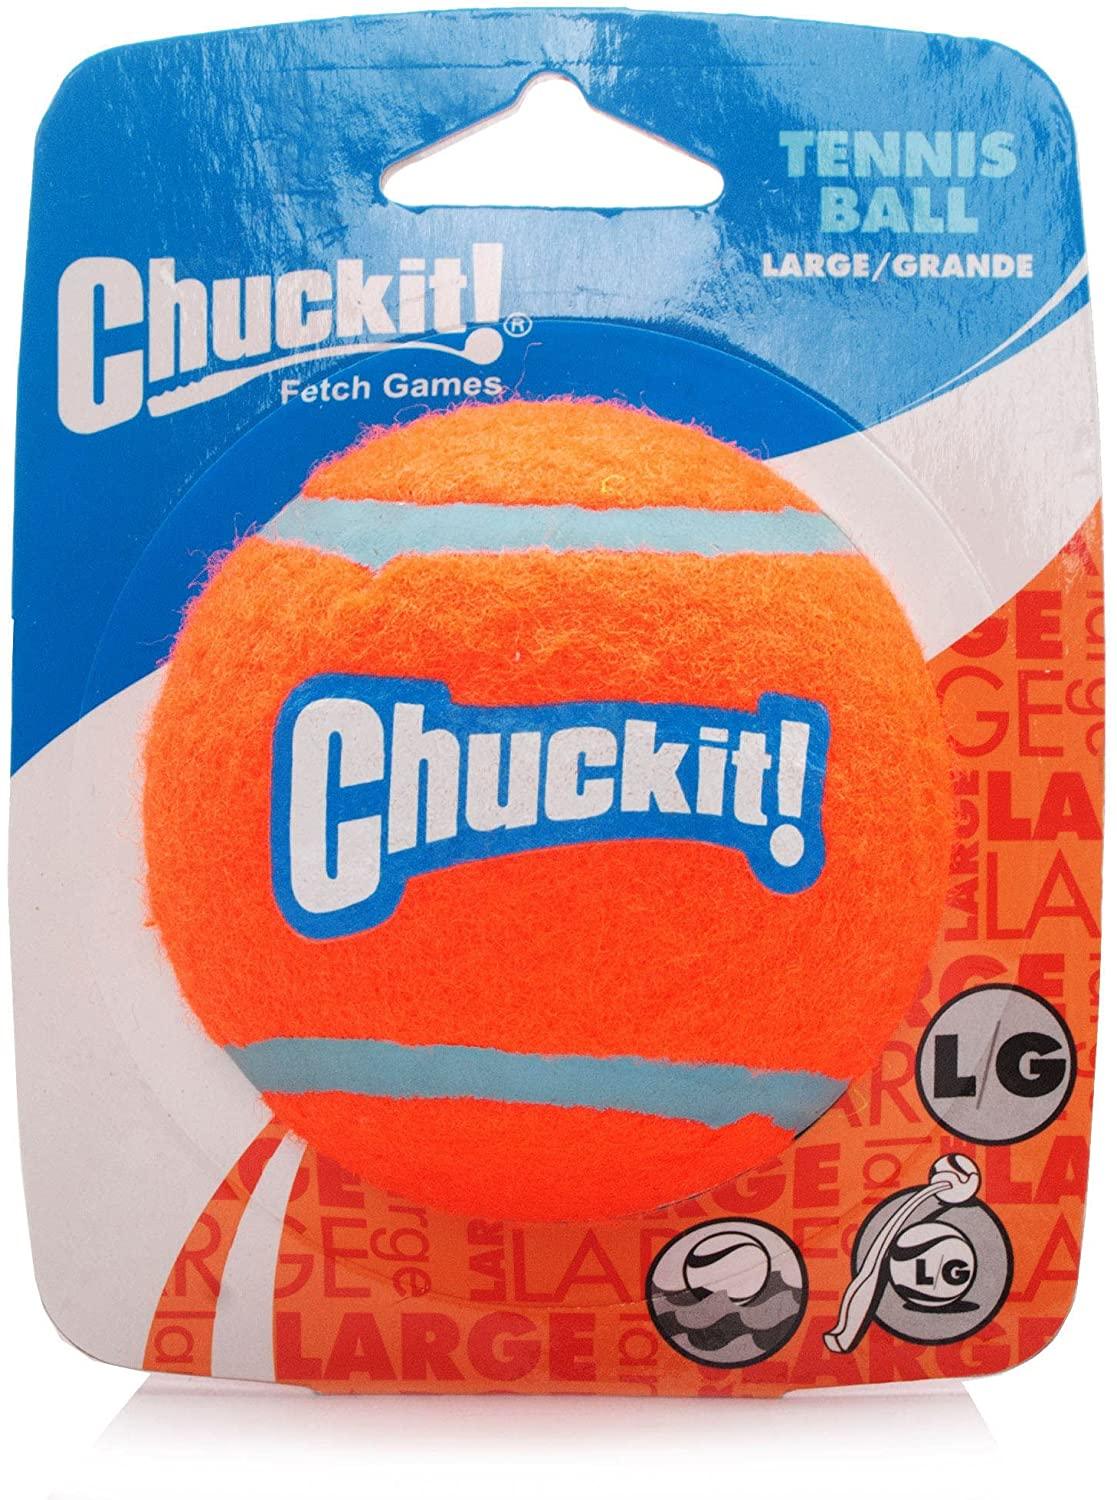 Chuckit! Tennis Ball Large (Single) - Pet's Play Toy Store